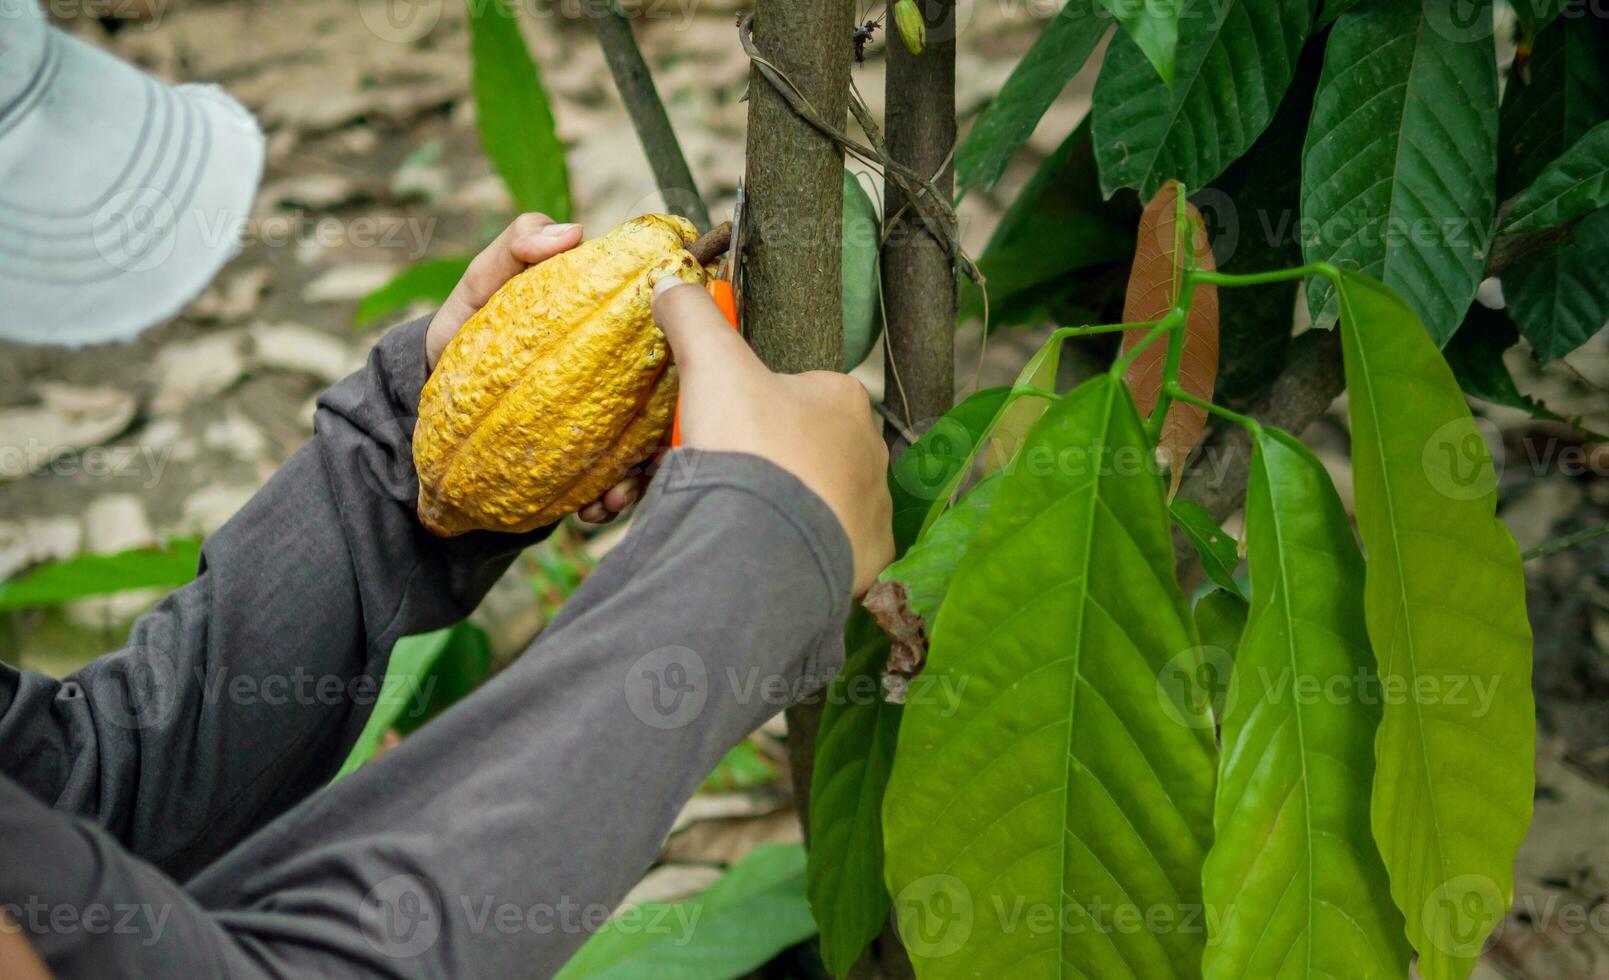 Cocoa farmer use pruning shears to cut the cocoa pods or fruit ripe yellow cacao from the cacao tree. Harvest the agricultural cocoa business produces. photo